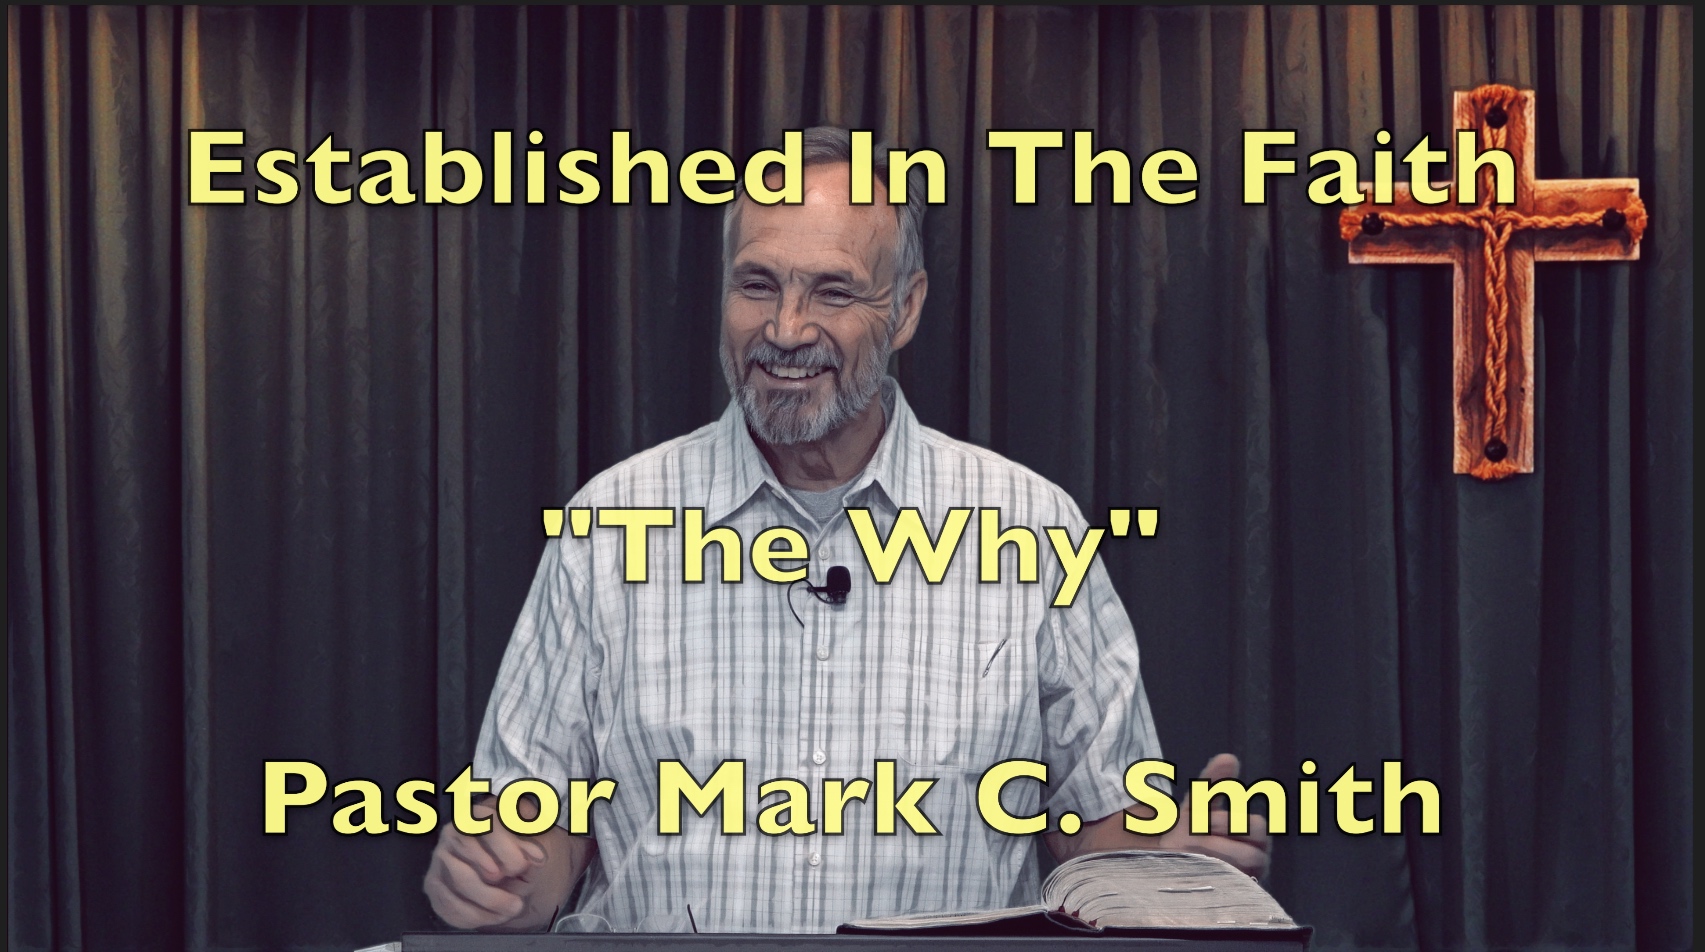 Established In The Faith - The Why